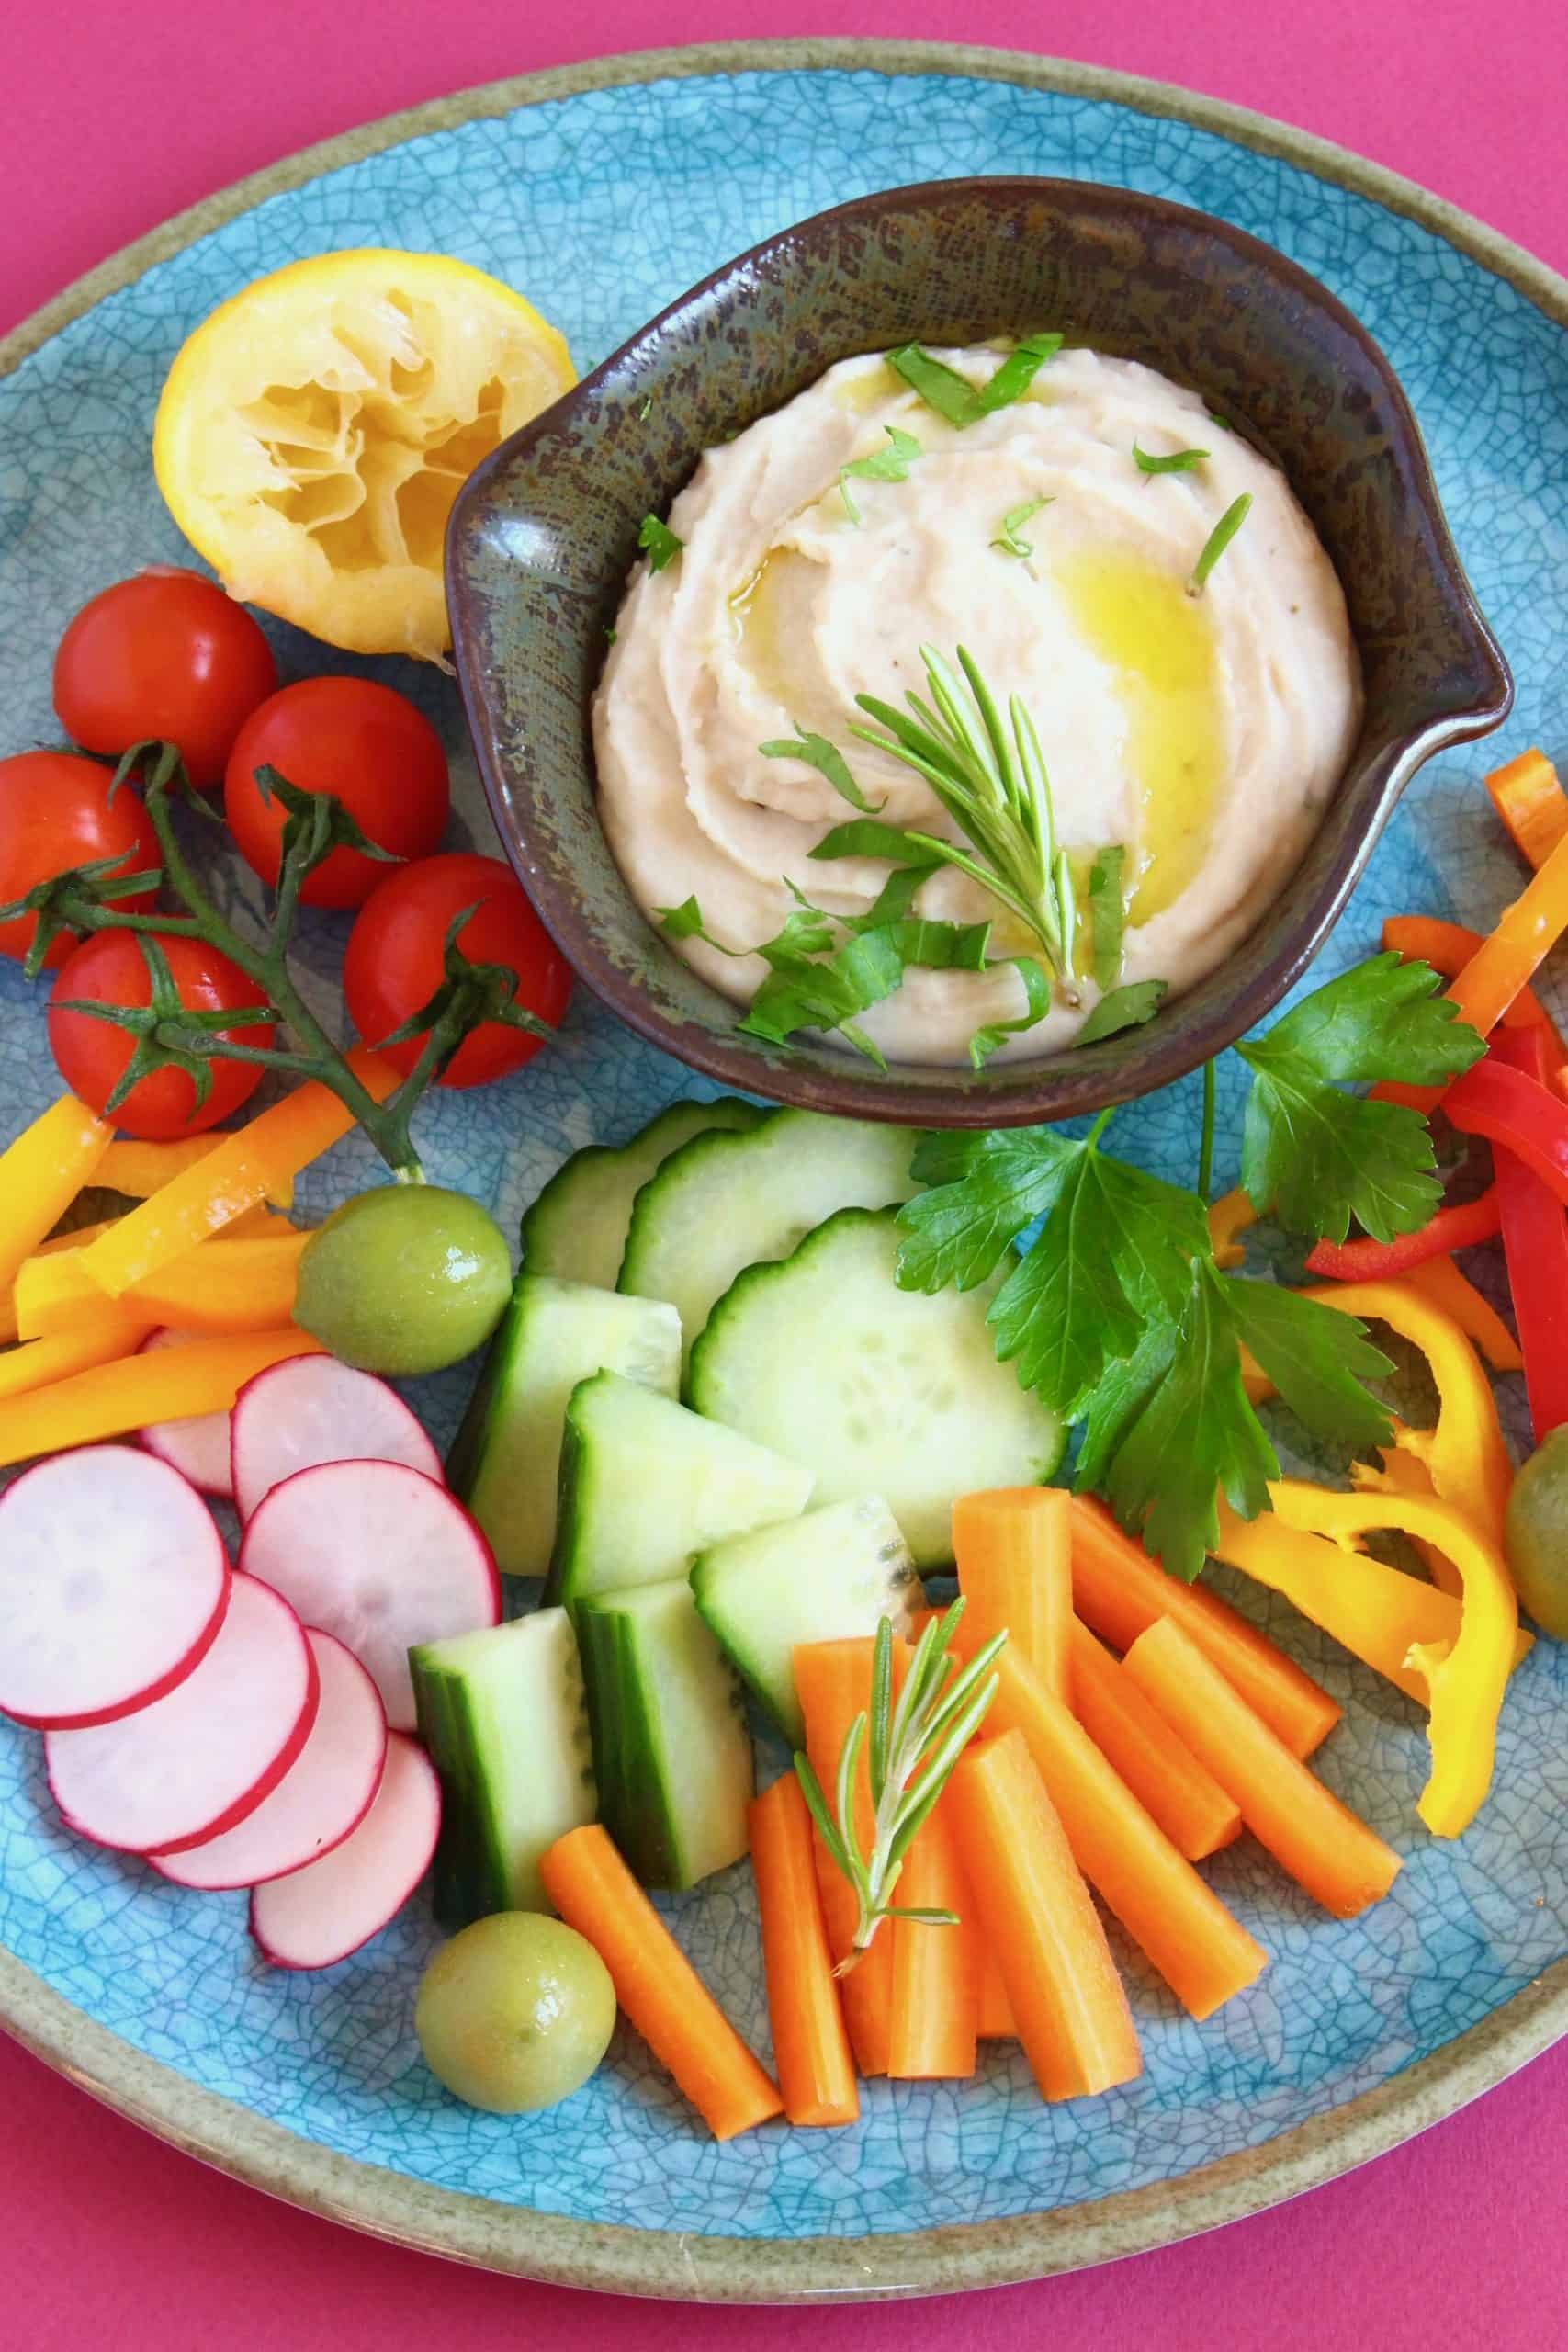 Italian hummus in a black bowl with vegetable crudités on a blue plate